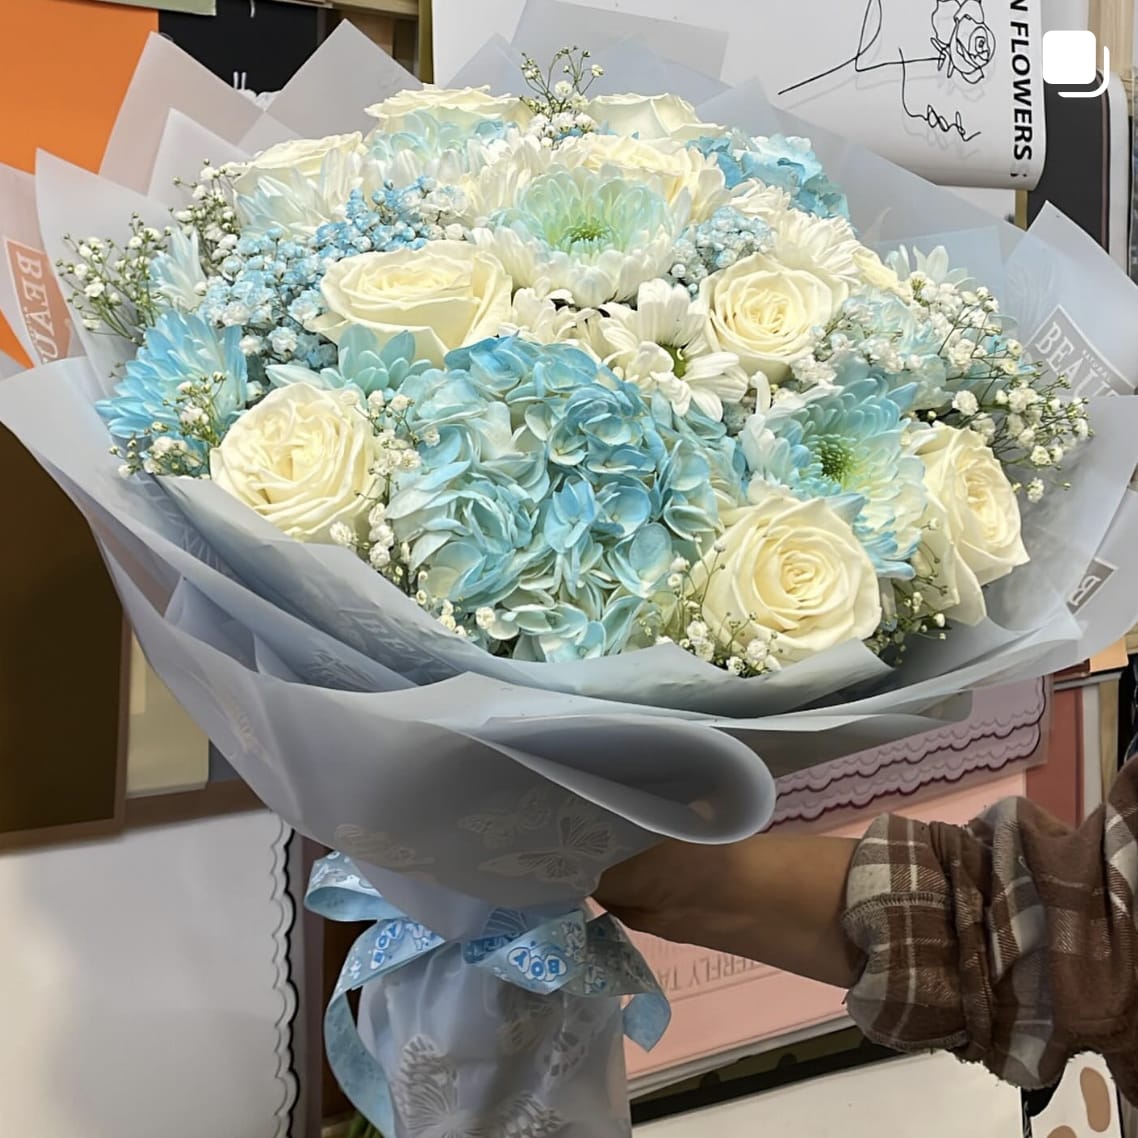 Baby Boy Bouquet -  Celebrate the arrival of a baby boy with a stunning bouquet filled with beautiful blue and white flowers!